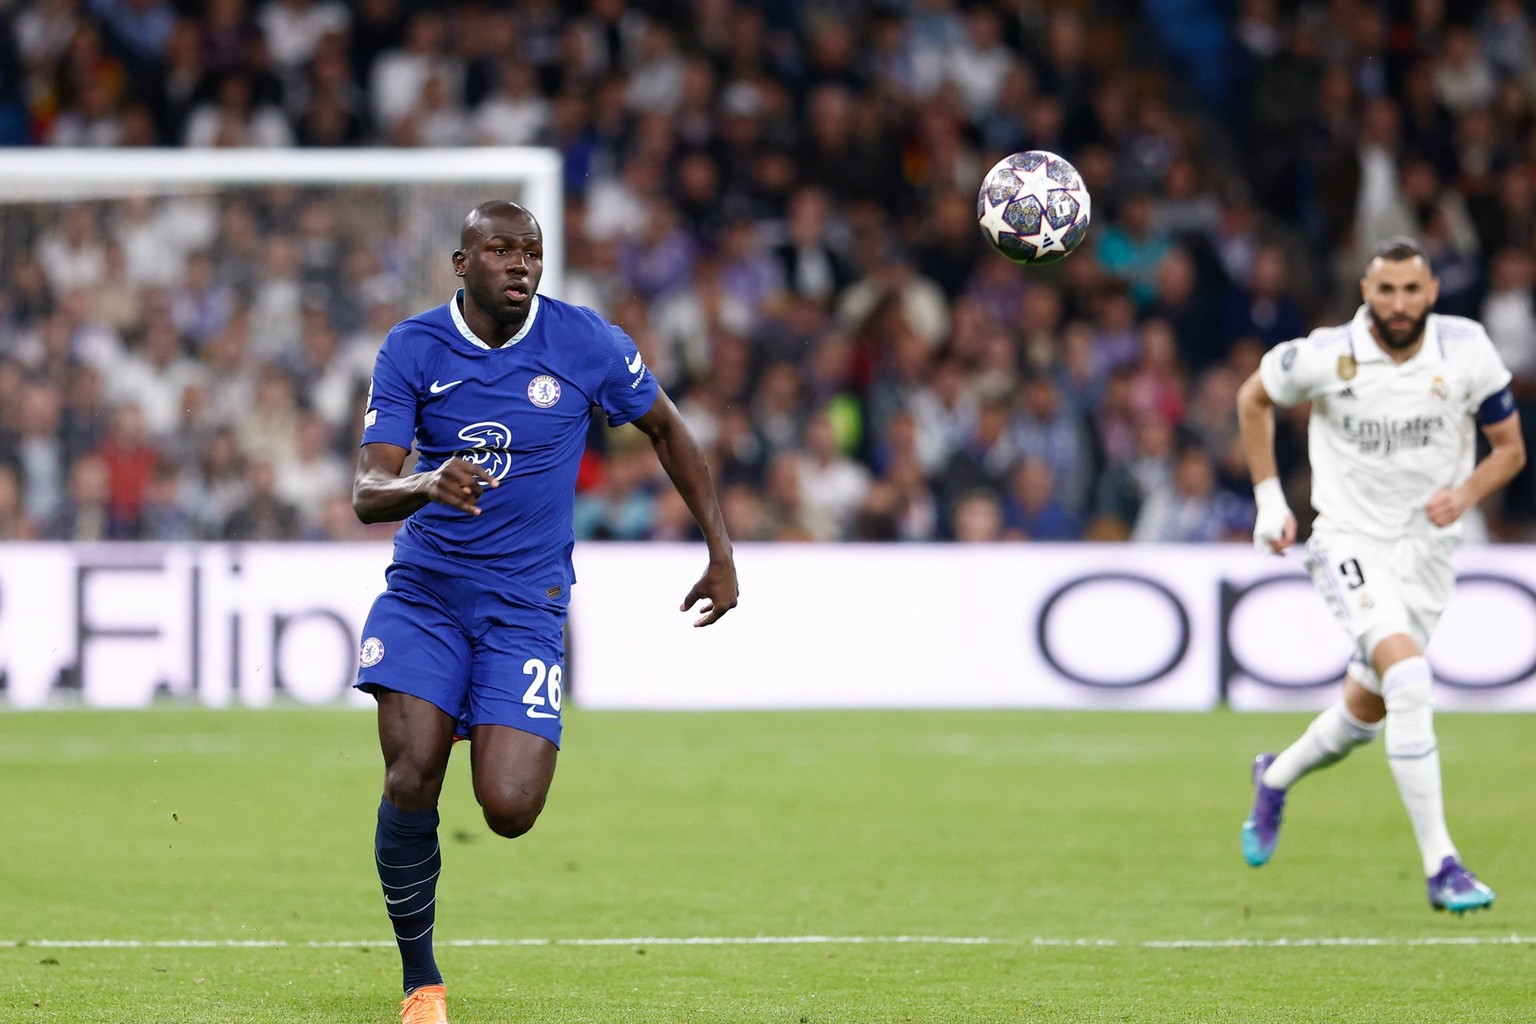 April 12, 2023, MADRID, MADRID, SPAIN: Kalidou Koulibaly of Chelsea in action during the UEFA Champions League, Quarter Finals round 1, football match between Real Madrid and Chelsea FC at Santiago Be ...